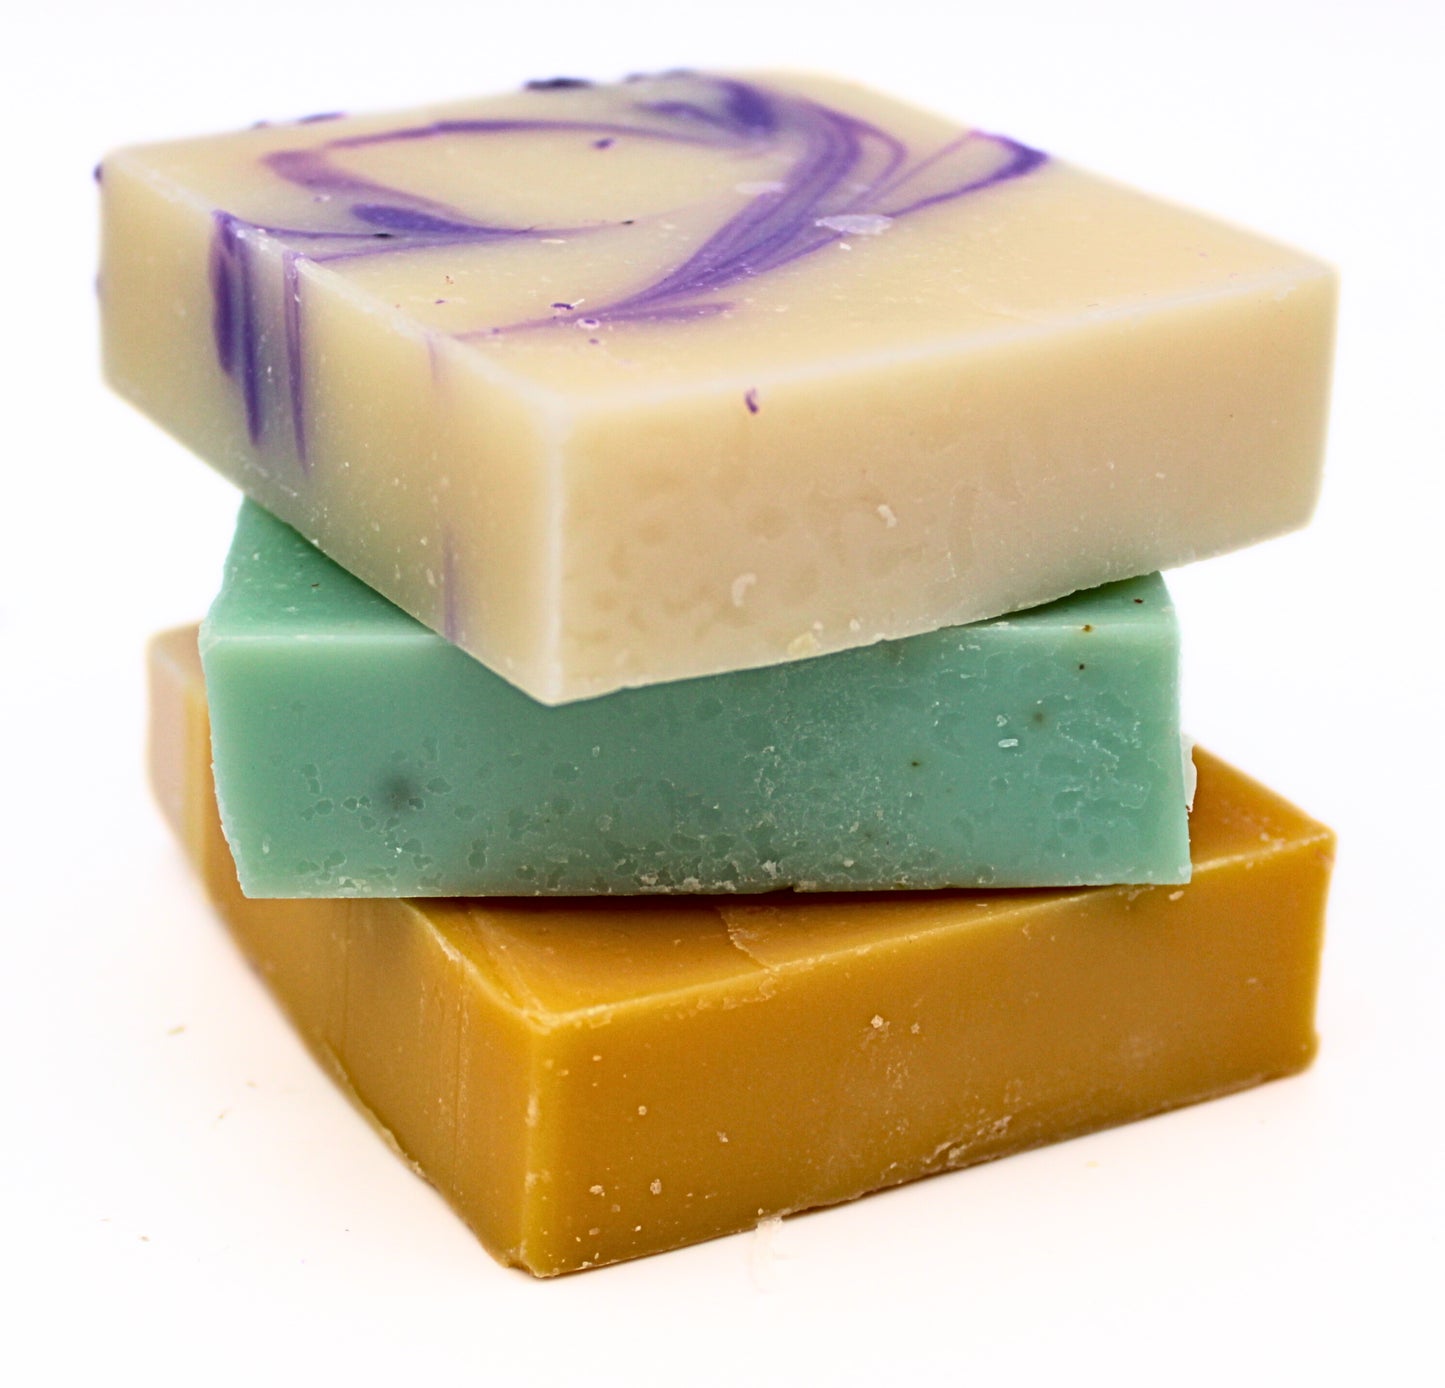 Palm Free Irish Soaps Set of Three Soaps in Giftpack